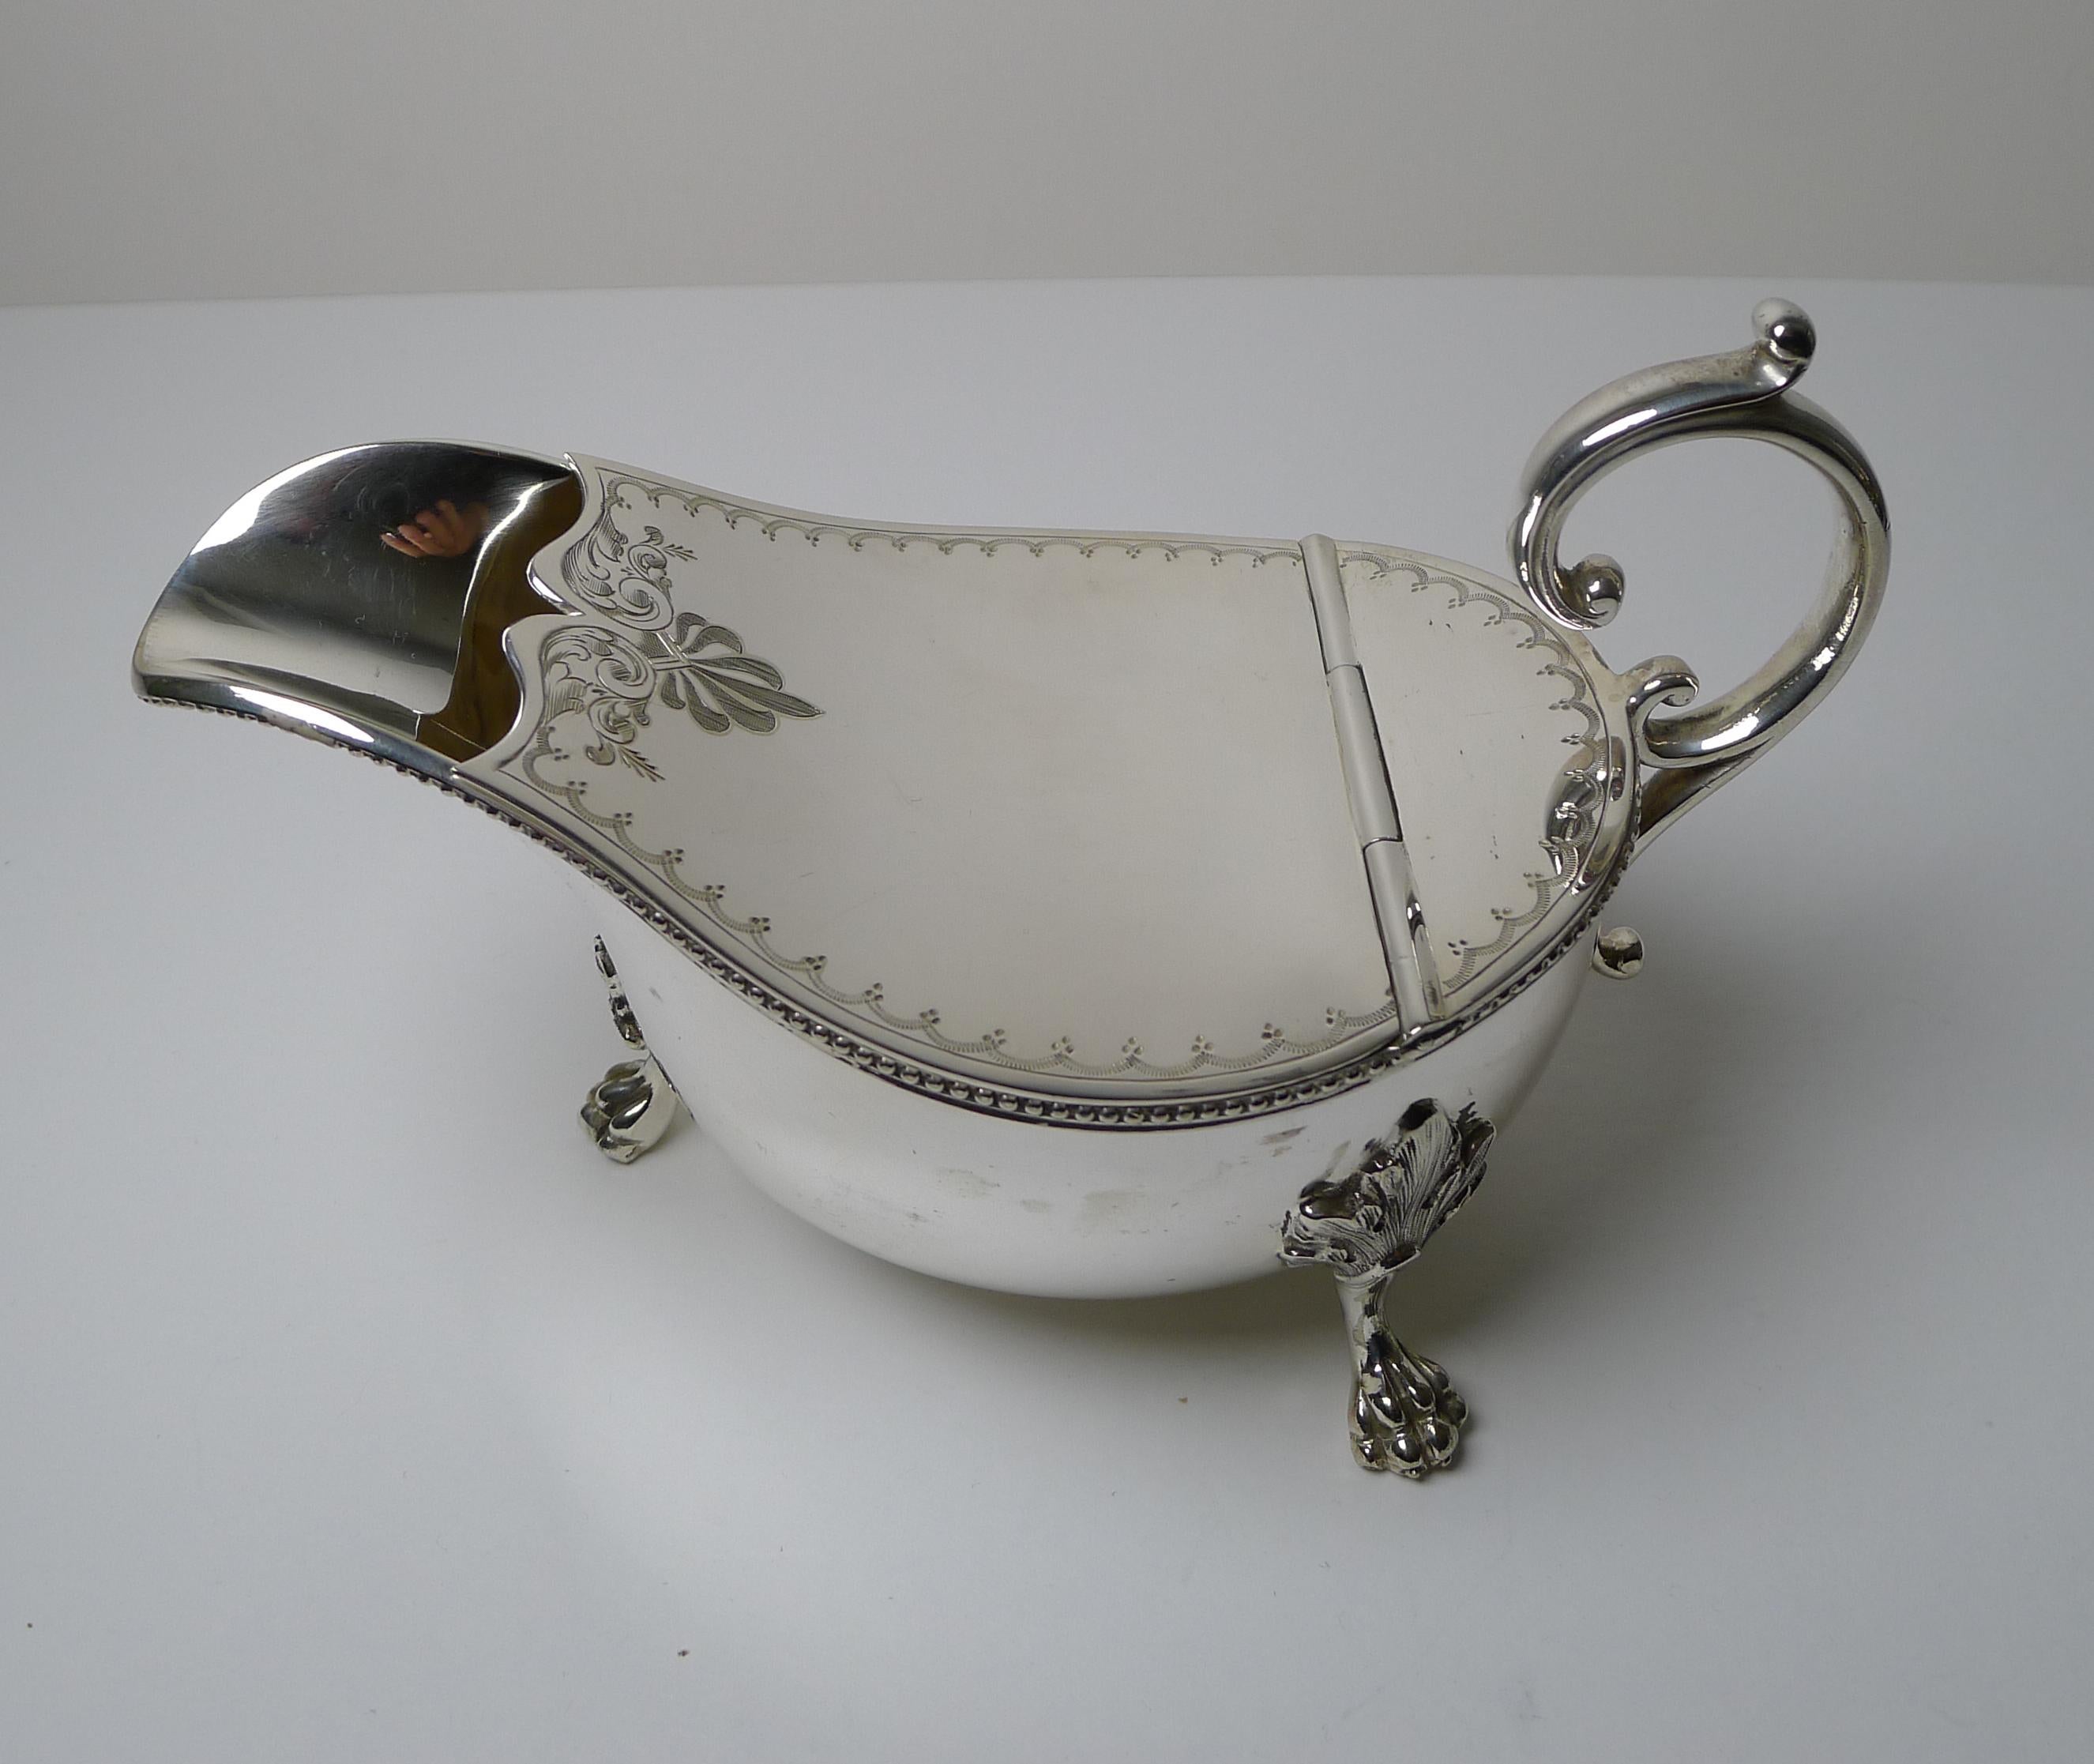 A most unusual Victorian novelty spoon warmer in the form of a sauce or gravy boat.

The warmer stands on three handsome legs leading down to Lion's paw feet.

The hinged lid is beautifully engraved and the rim with a traditional beaded edge,